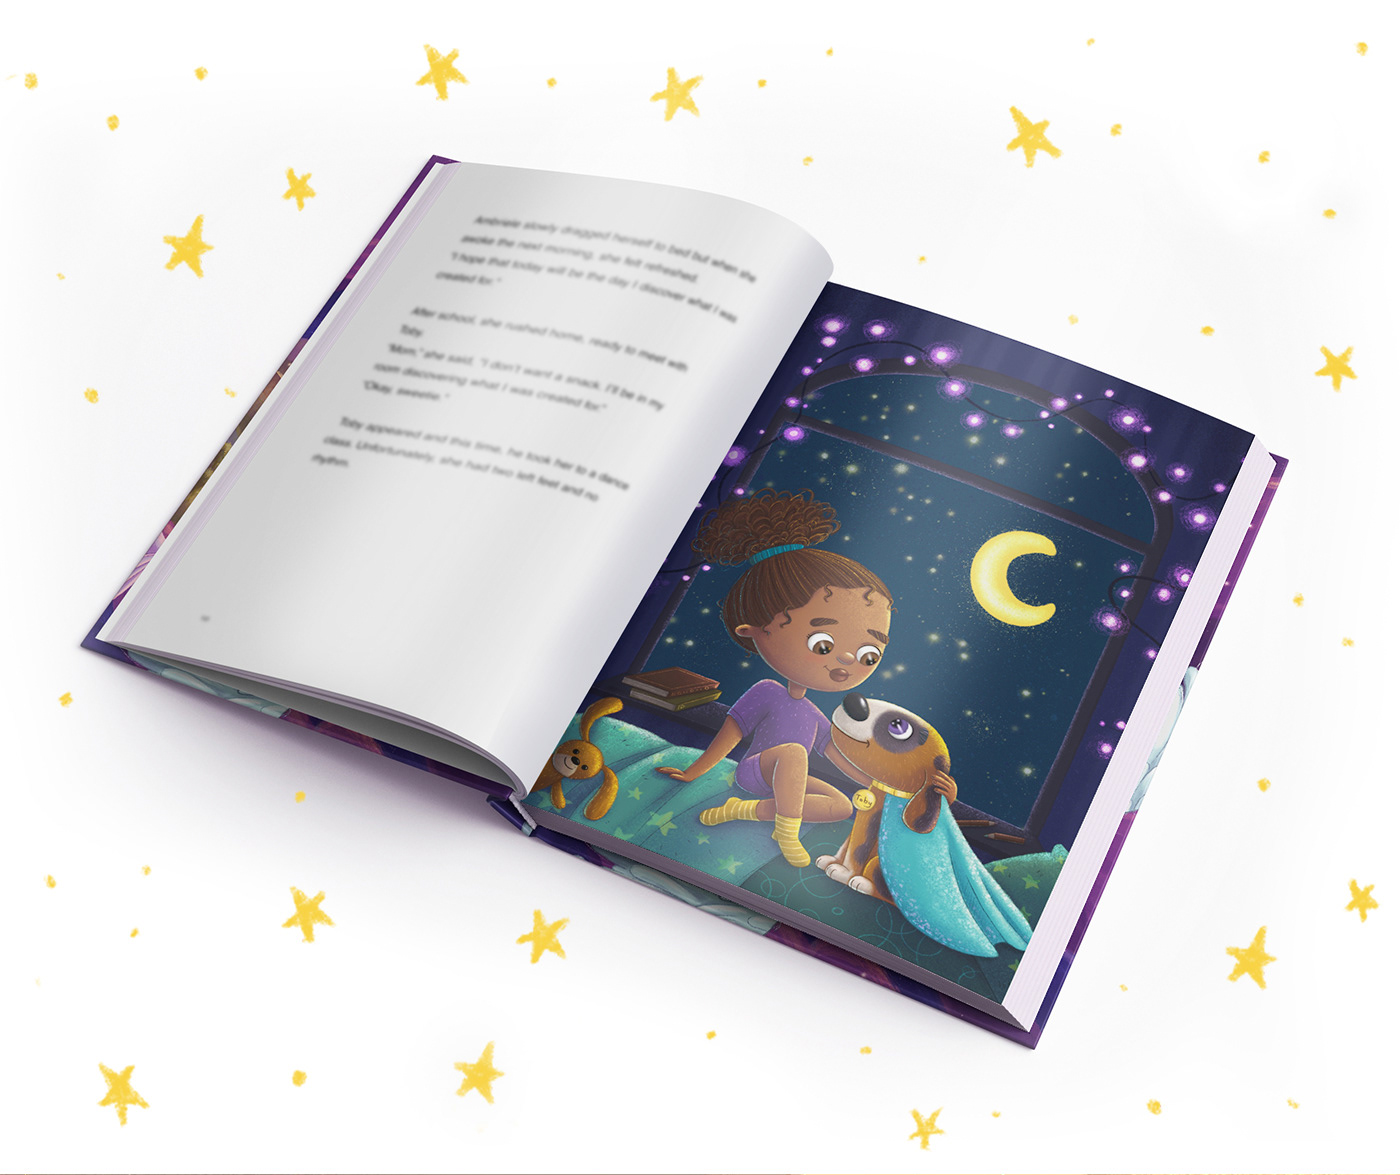 book for children book illustration Character Book Character design  children's book childrens book childrens illustration kidlit kids illustration Picture book